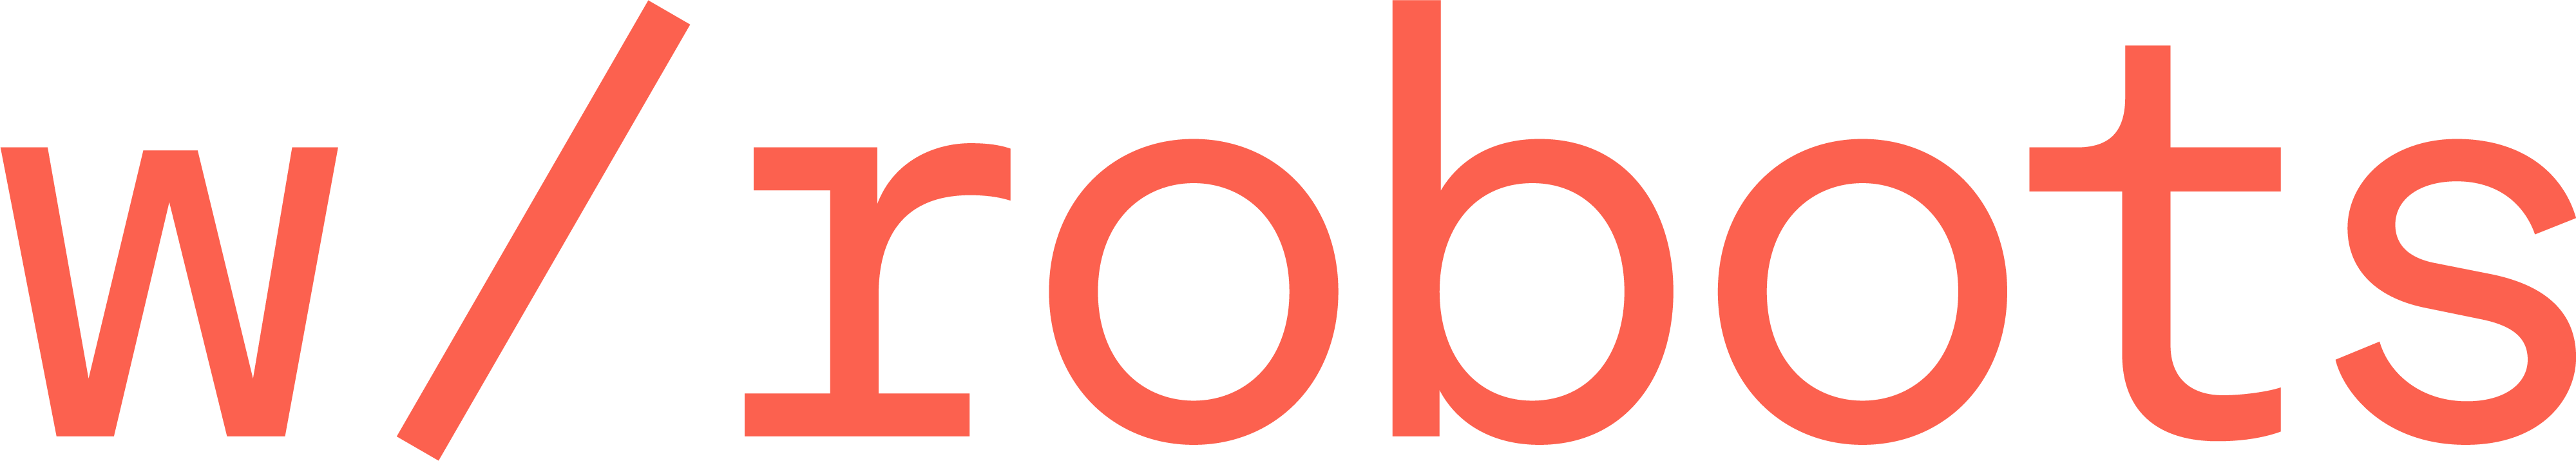 With Robots logo